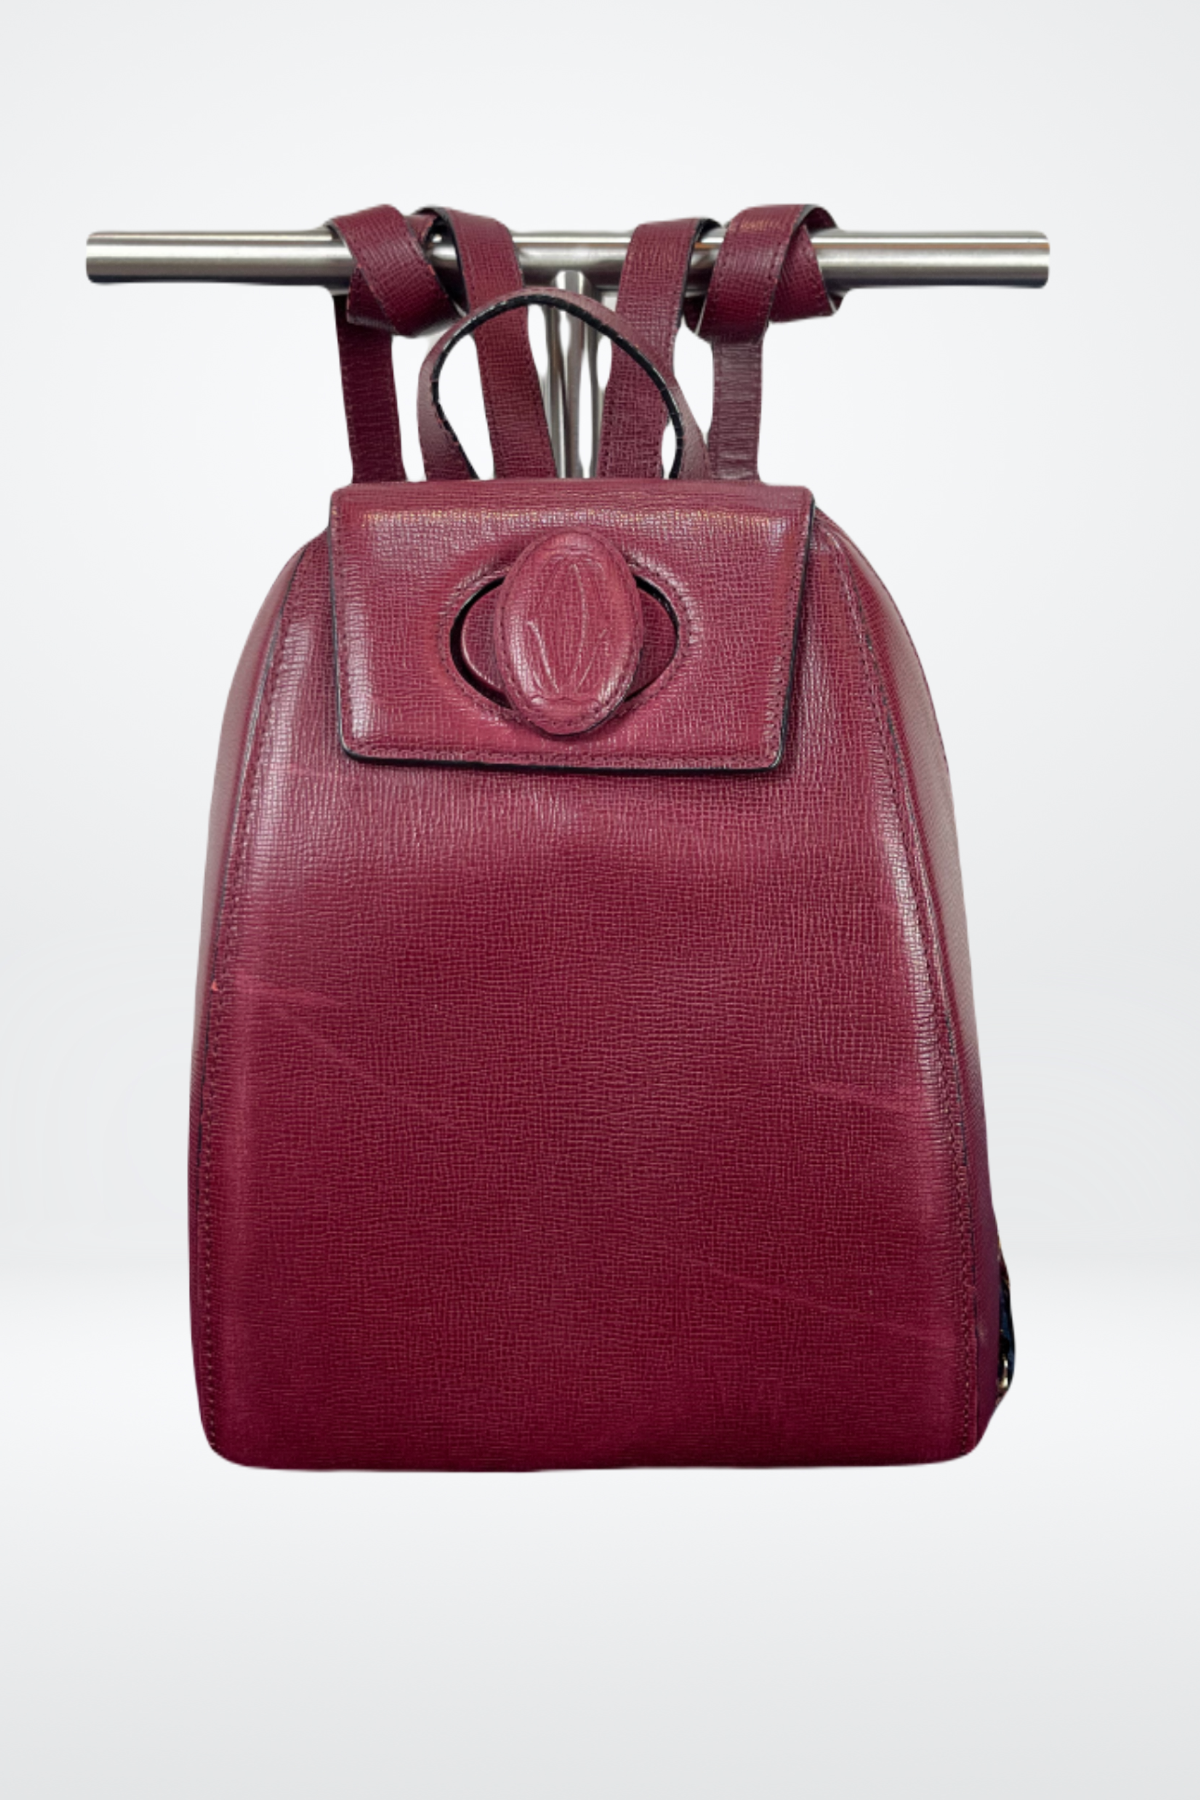 Cartier Leather Backpack with Insignia